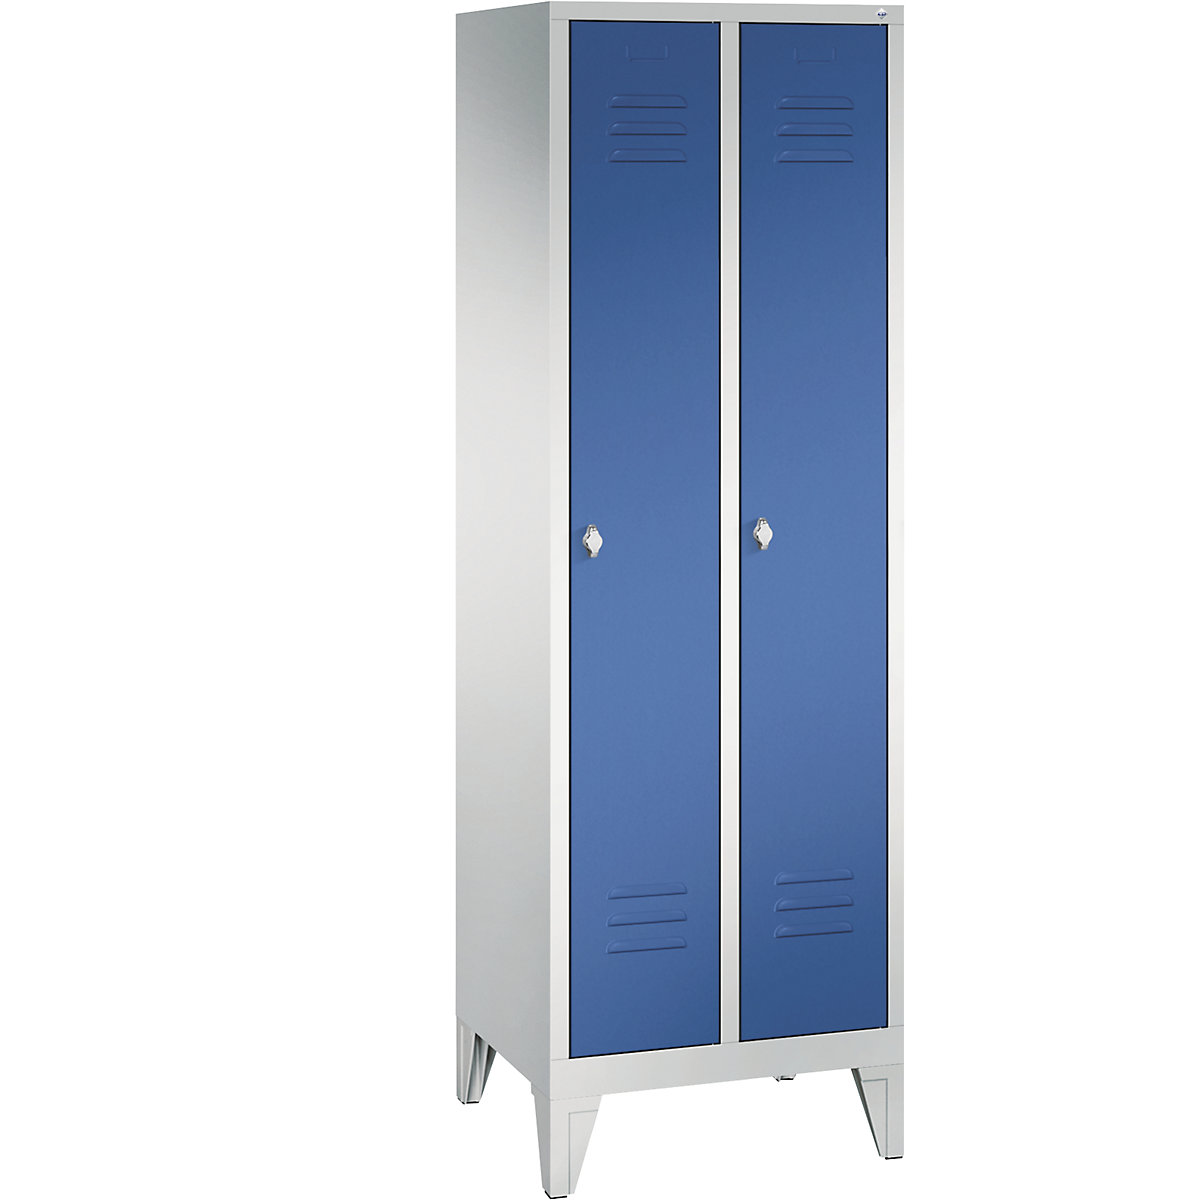 CLASSIC storage cupboard with feet – C+P, 2 compartments, compartment width 300 mm, light grey / gentian blue-4